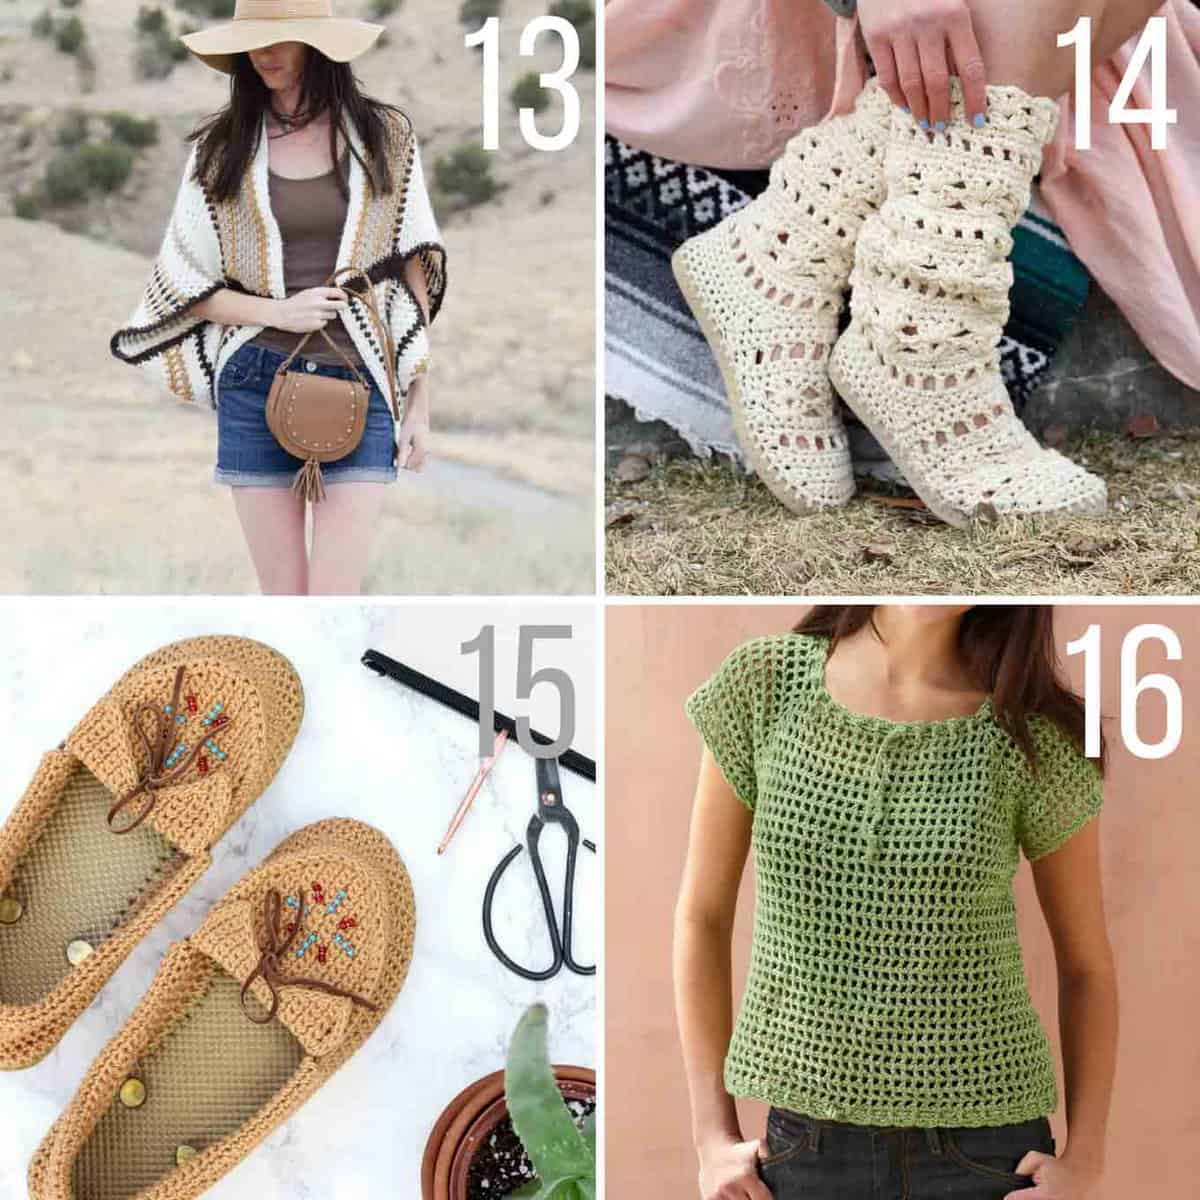 No crochet hibernation! This collection of popular spring and summer crochet patterns using Lion Brand yarn will give you plenty of ways to stay busy during the warmer months--and best of all, they're all free! Crochet shrugs, crochet tops and crochet shoes patterns are all included!